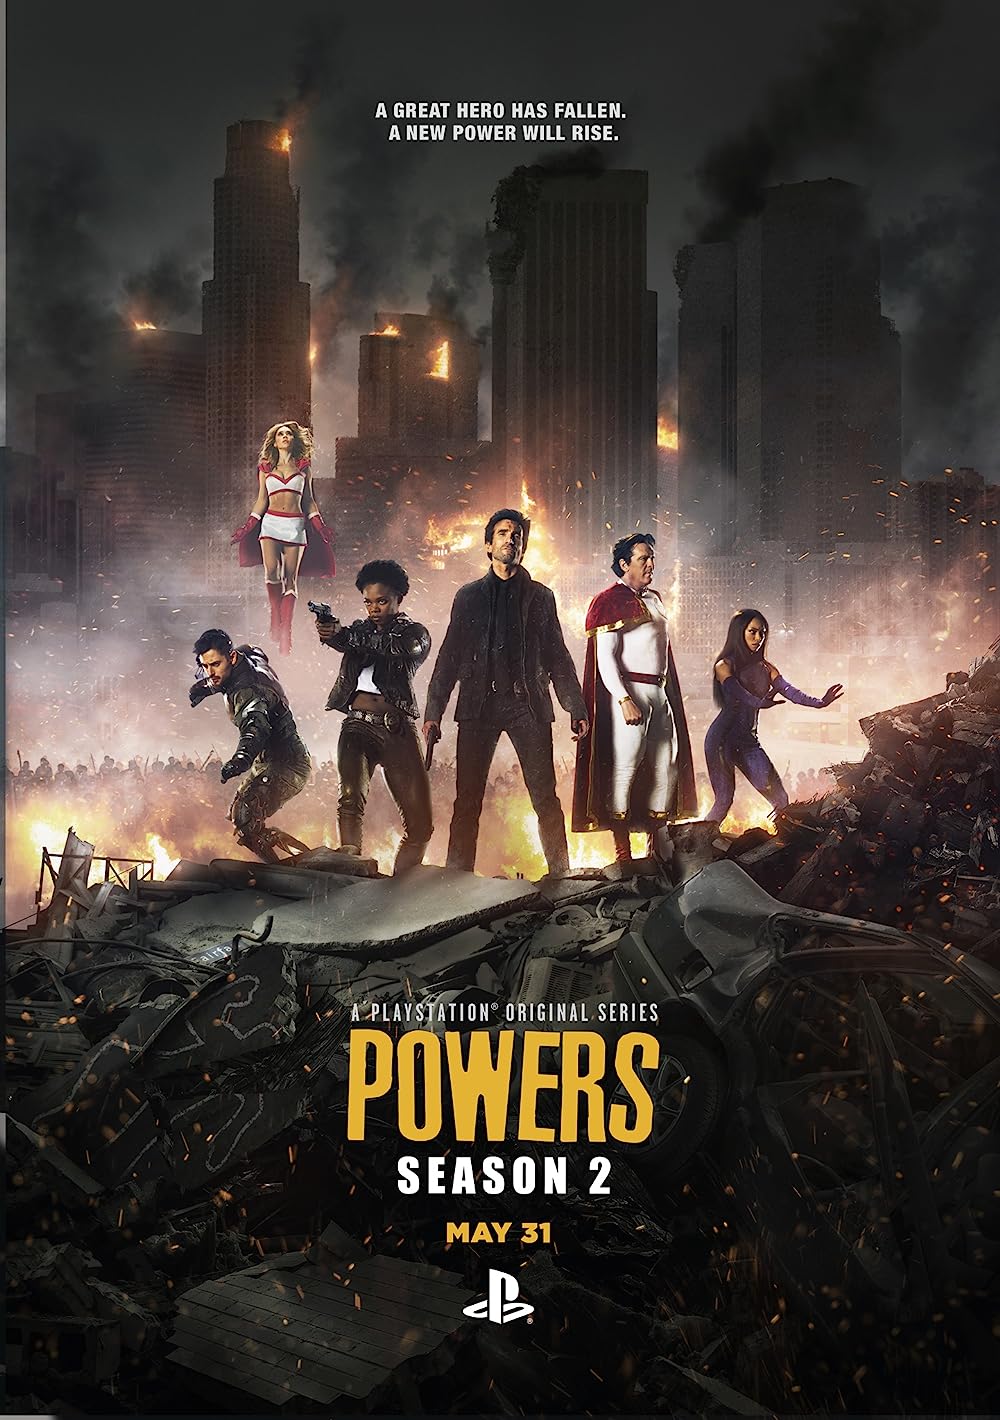 Powers poster